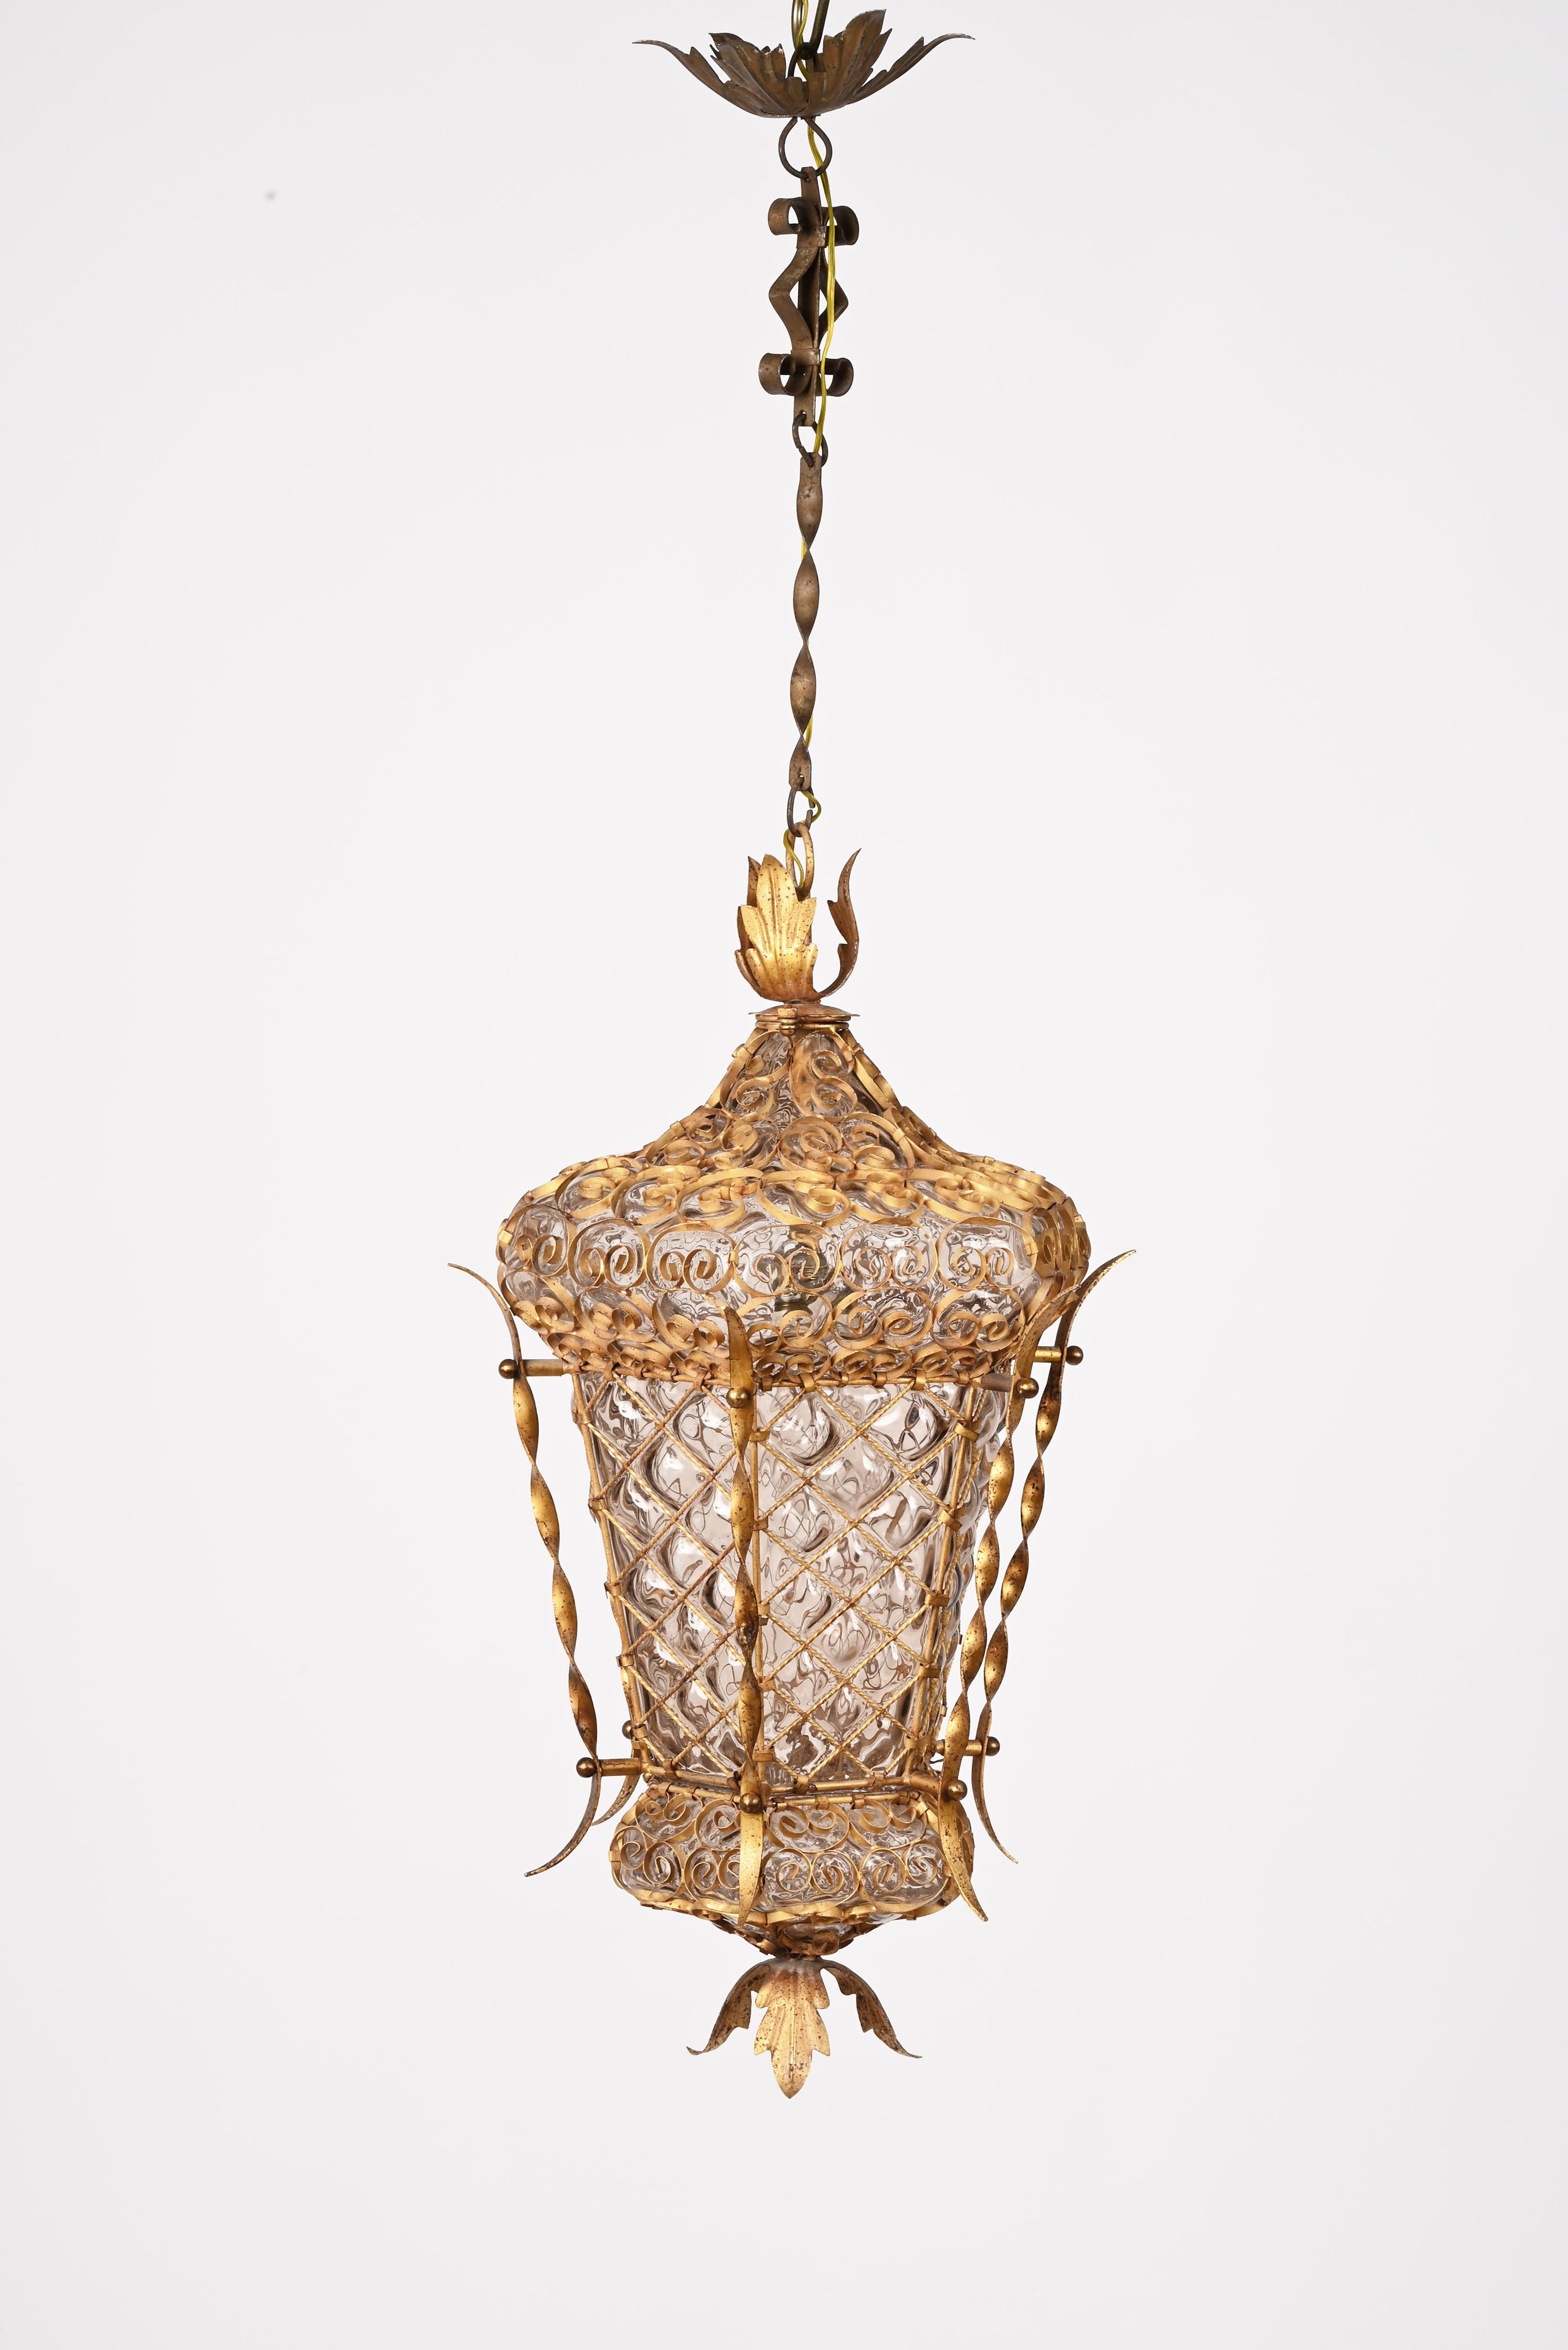 Mid-20th Century Midcentury Venetian Mouth Blown Glass in Gold Painted Metal Frame Lantern, 1940s For Sale